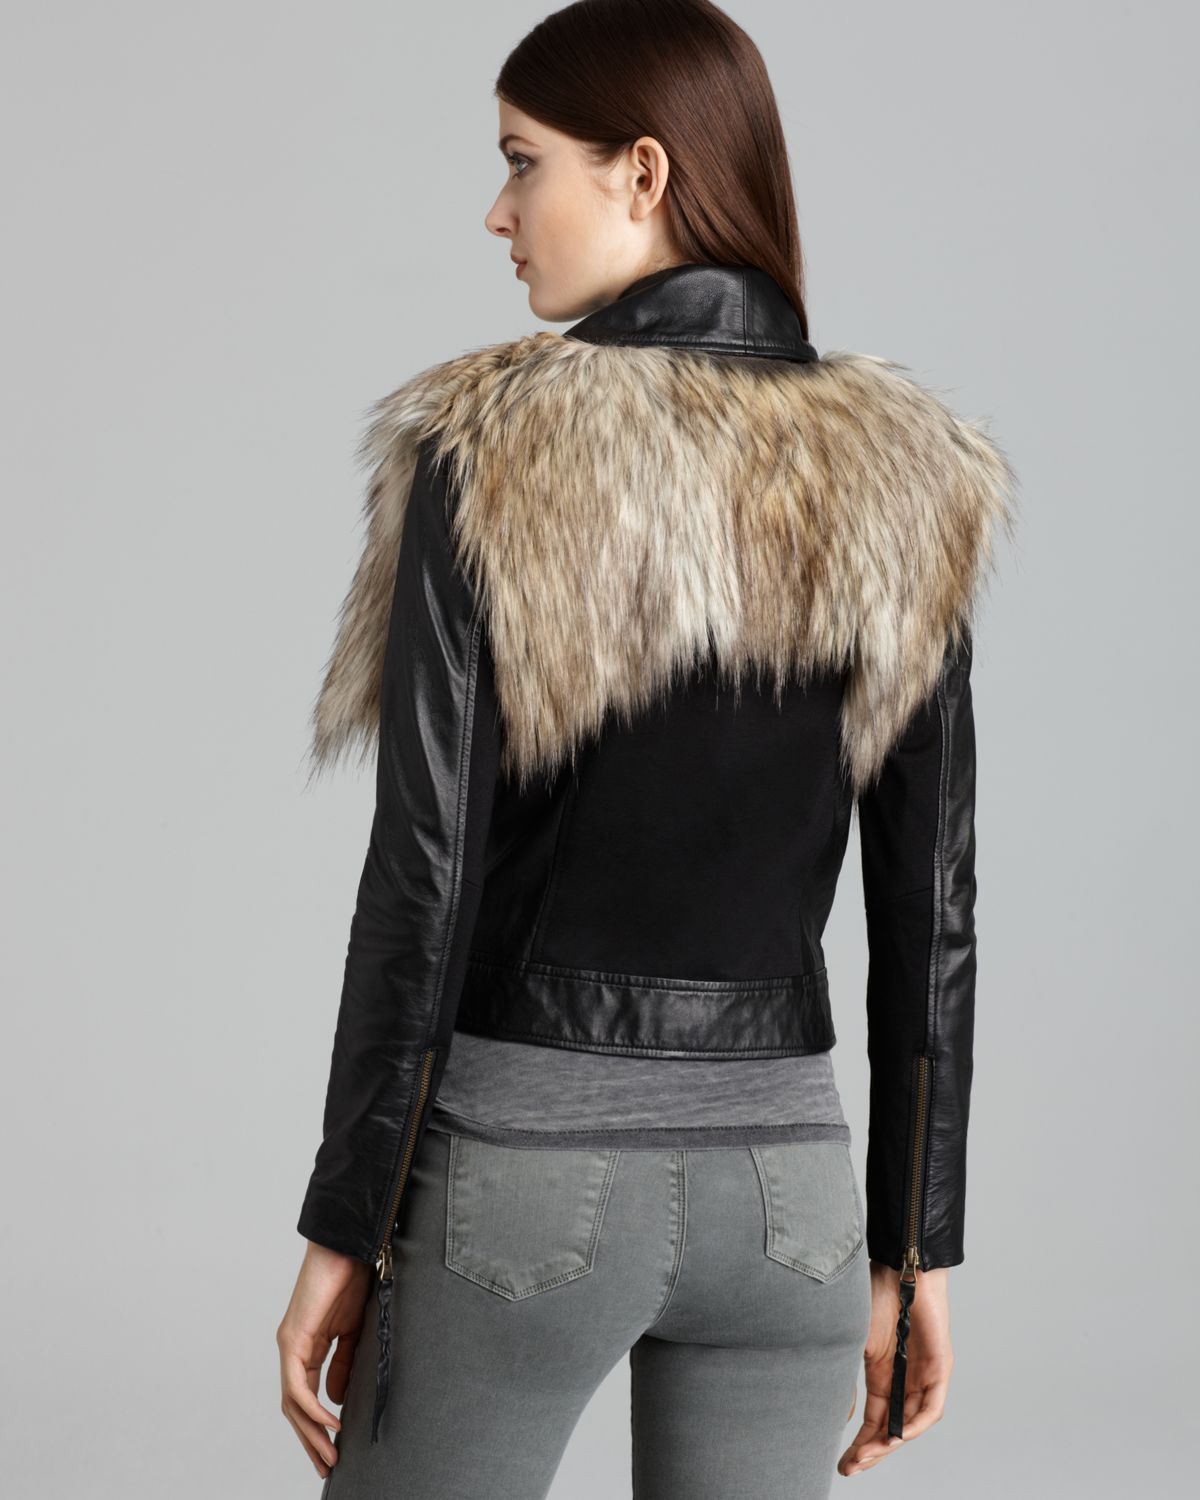 Lyst - Twelfth Street Cynthia Vincent Jacket Faux Leather and Faux Fur ...